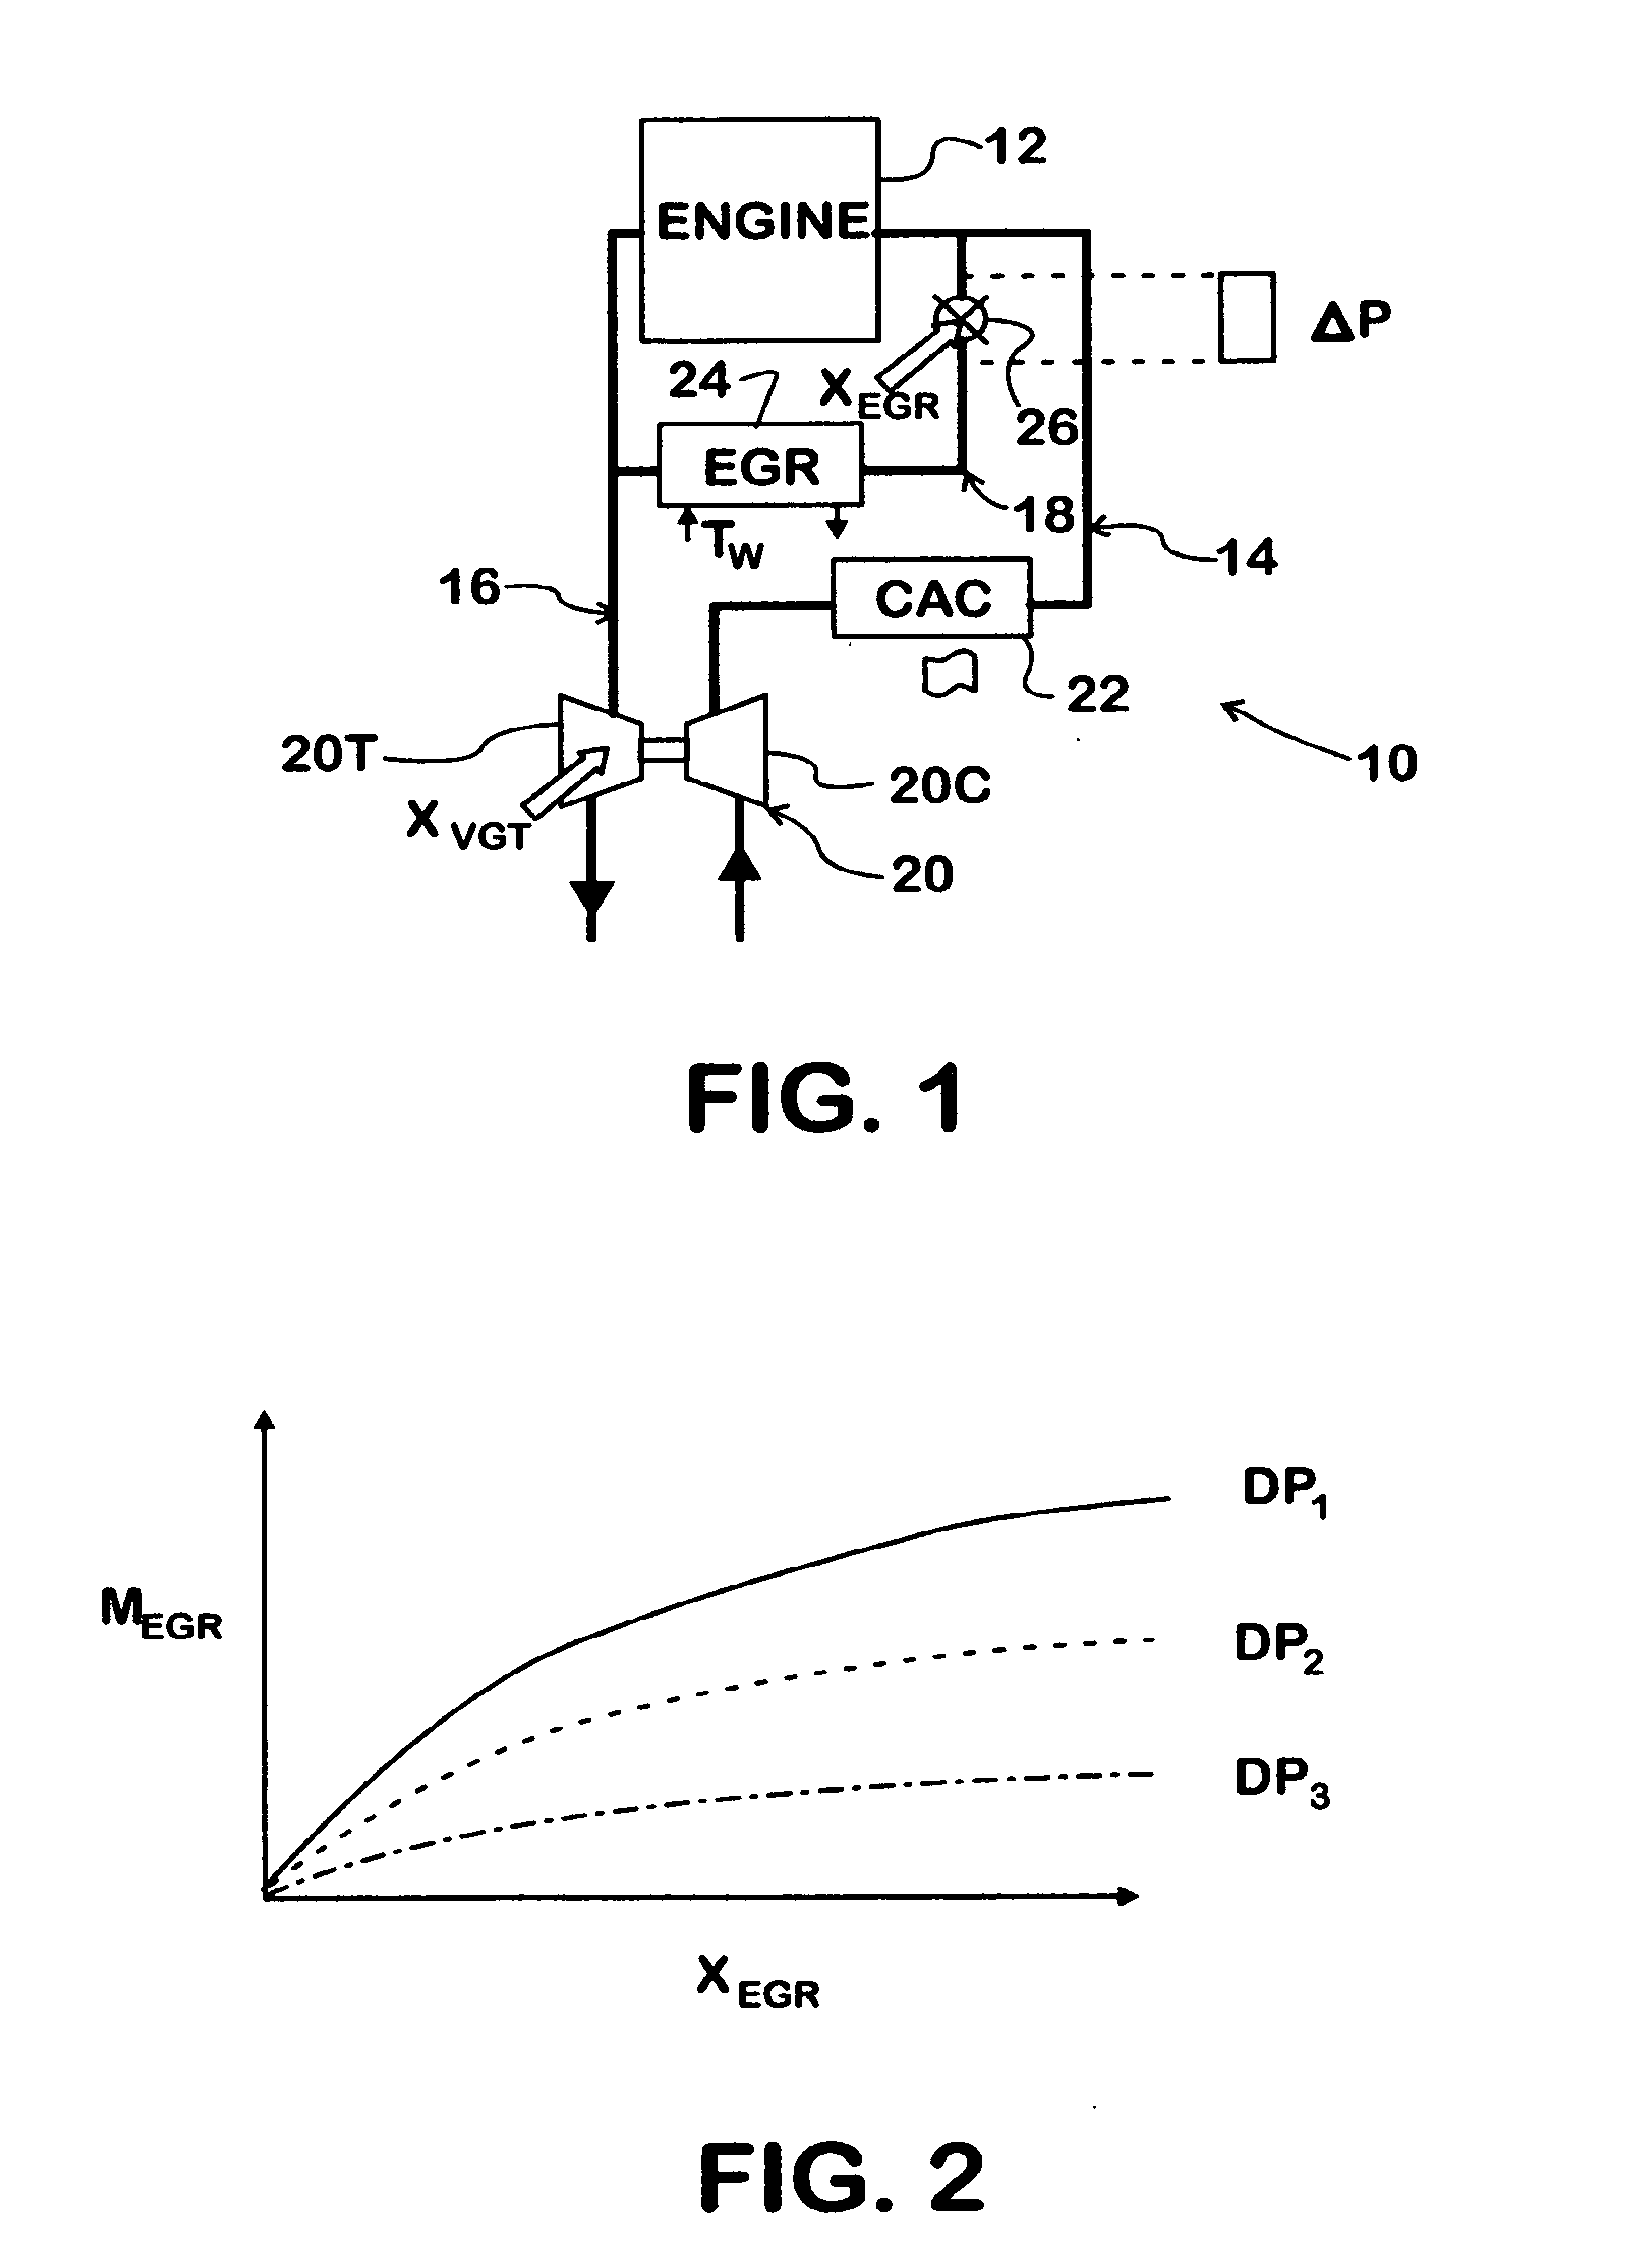 Strategy For Control Of Recirculated Exhaust Gas To Null Turbocharger Boost Error